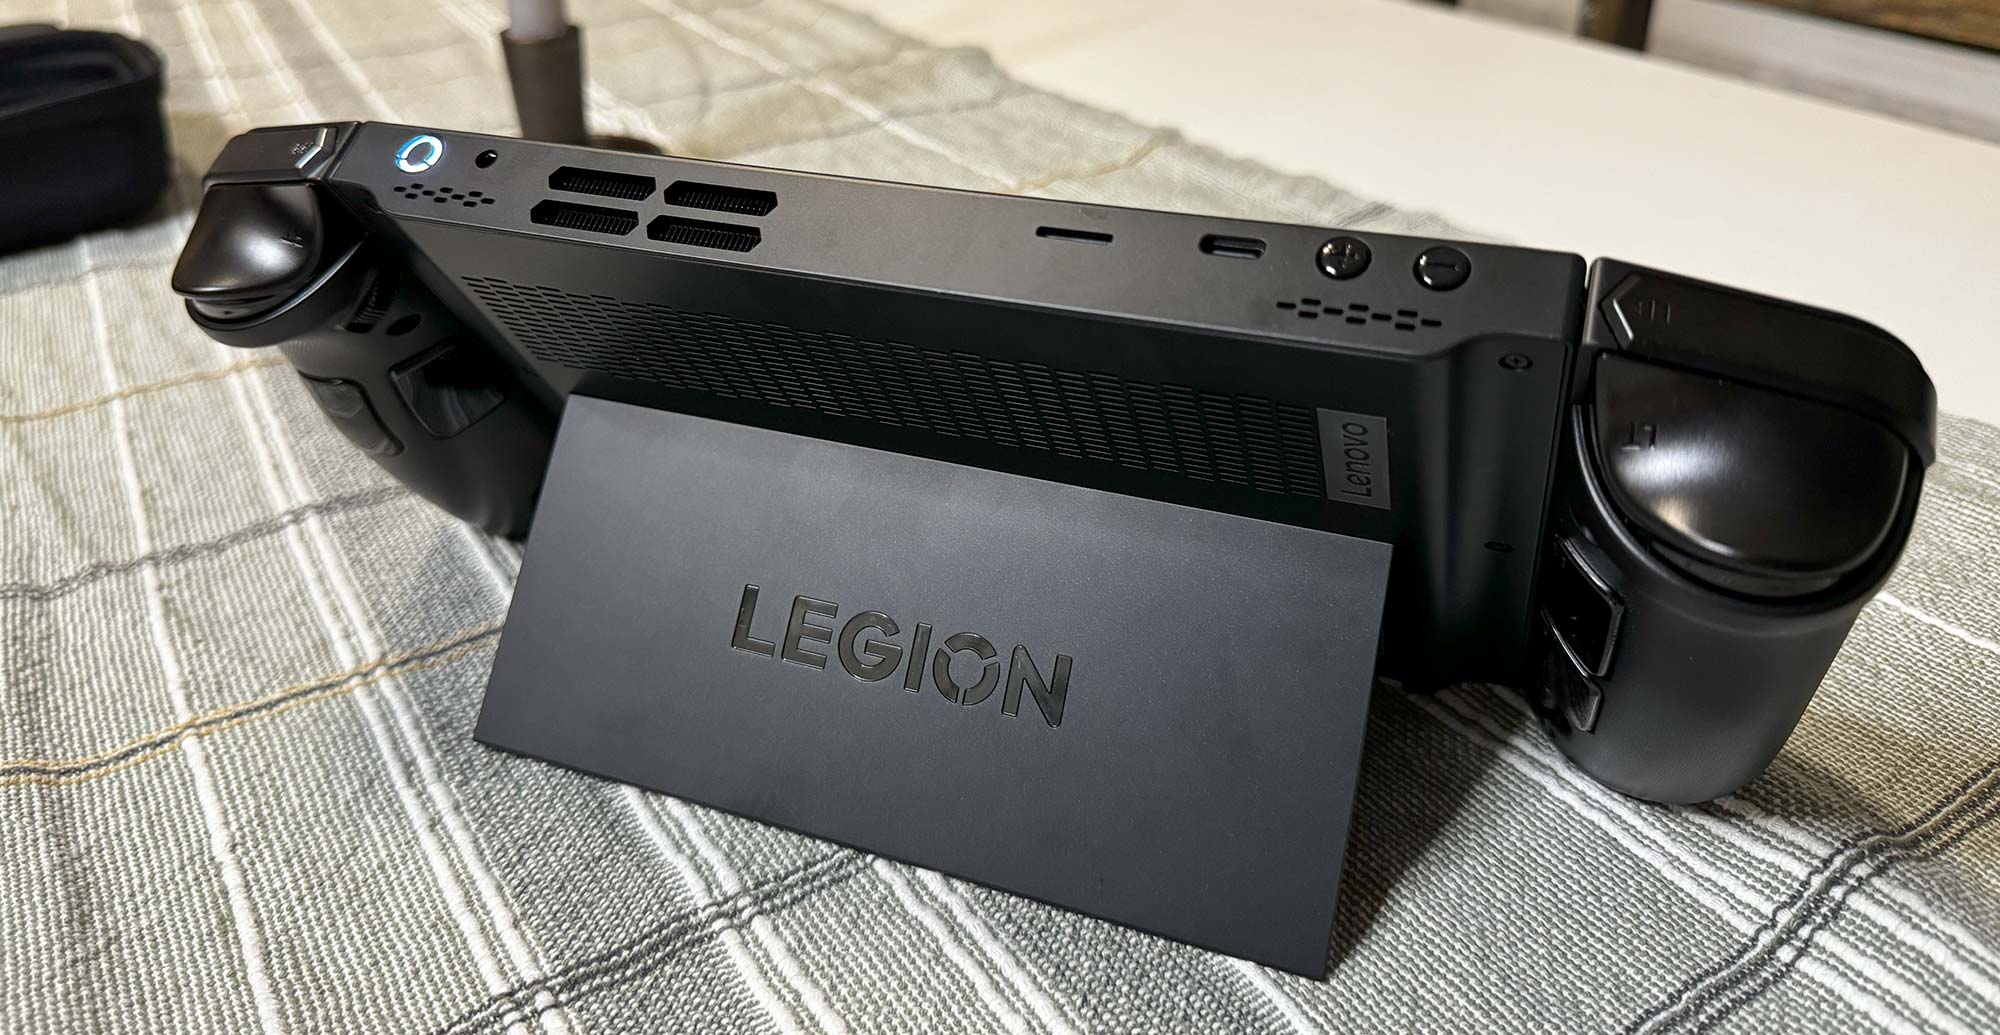 What are you guys thoughts on the Lenovo legion go? : r/ROGAlly